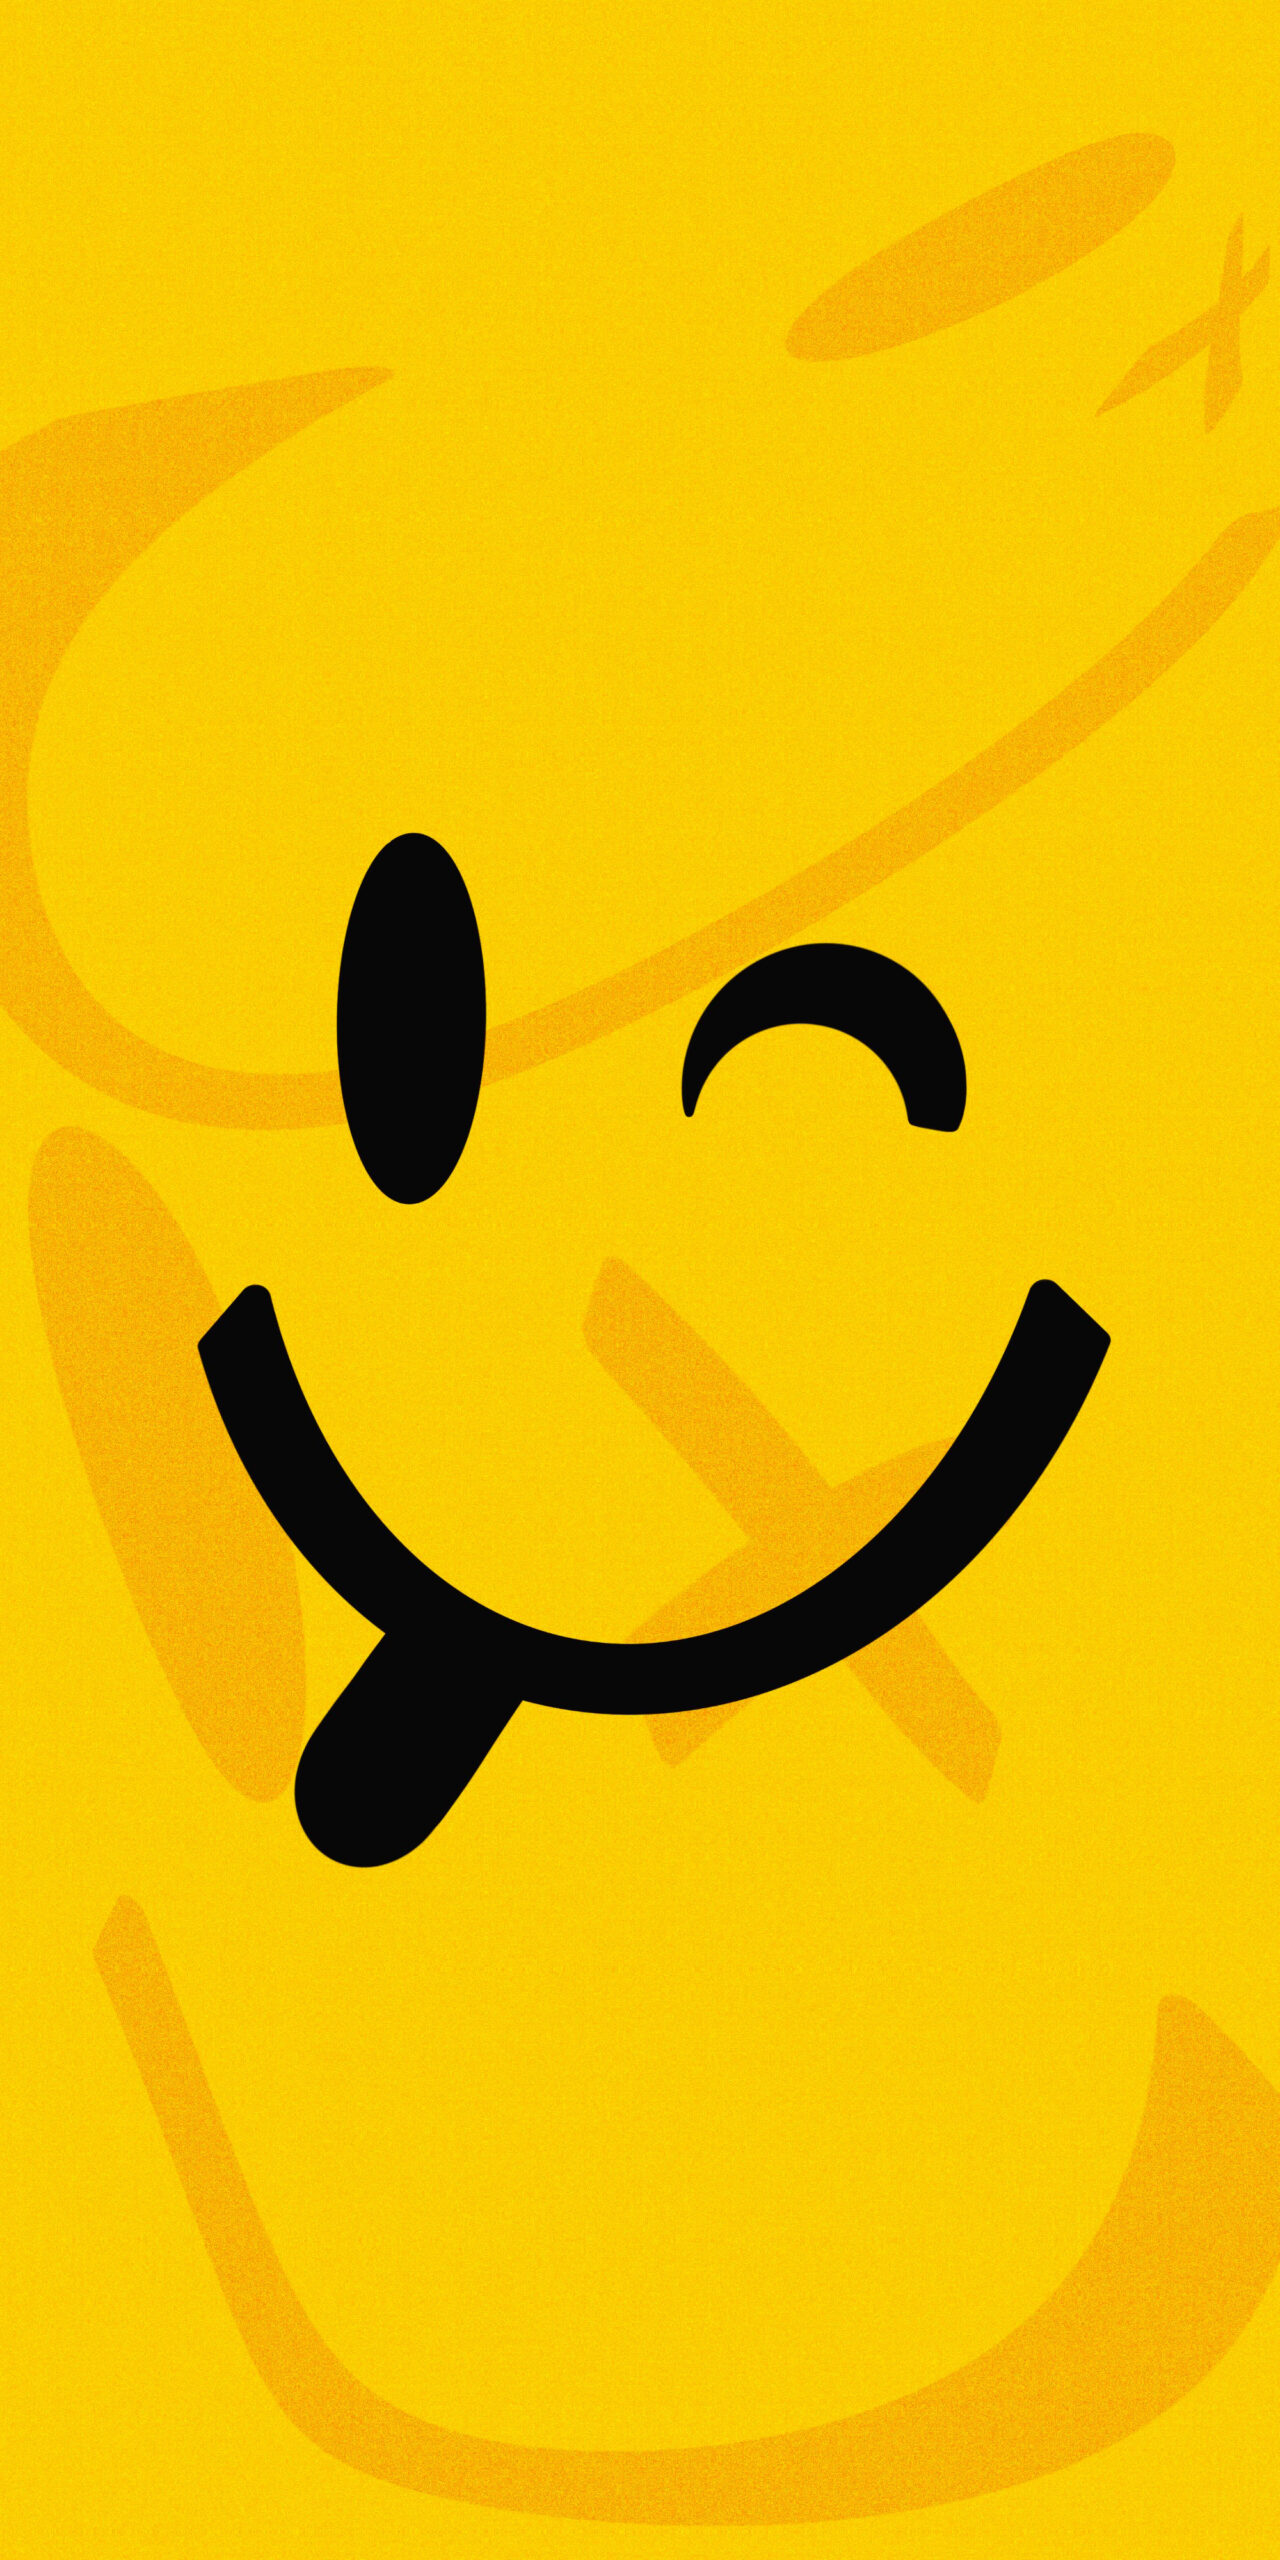 Yellow Smiley Face Wallpaper - Funny Smiley Face Wallpaper for iPhone